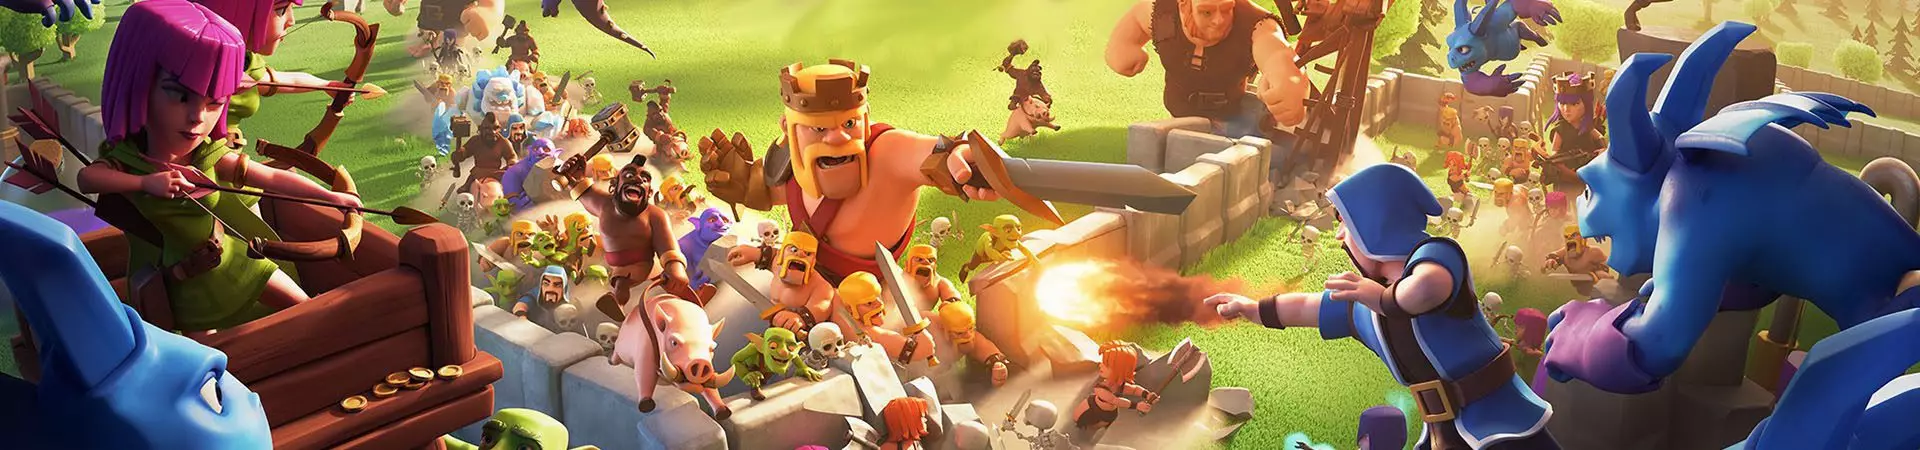 Clash of Clans banner